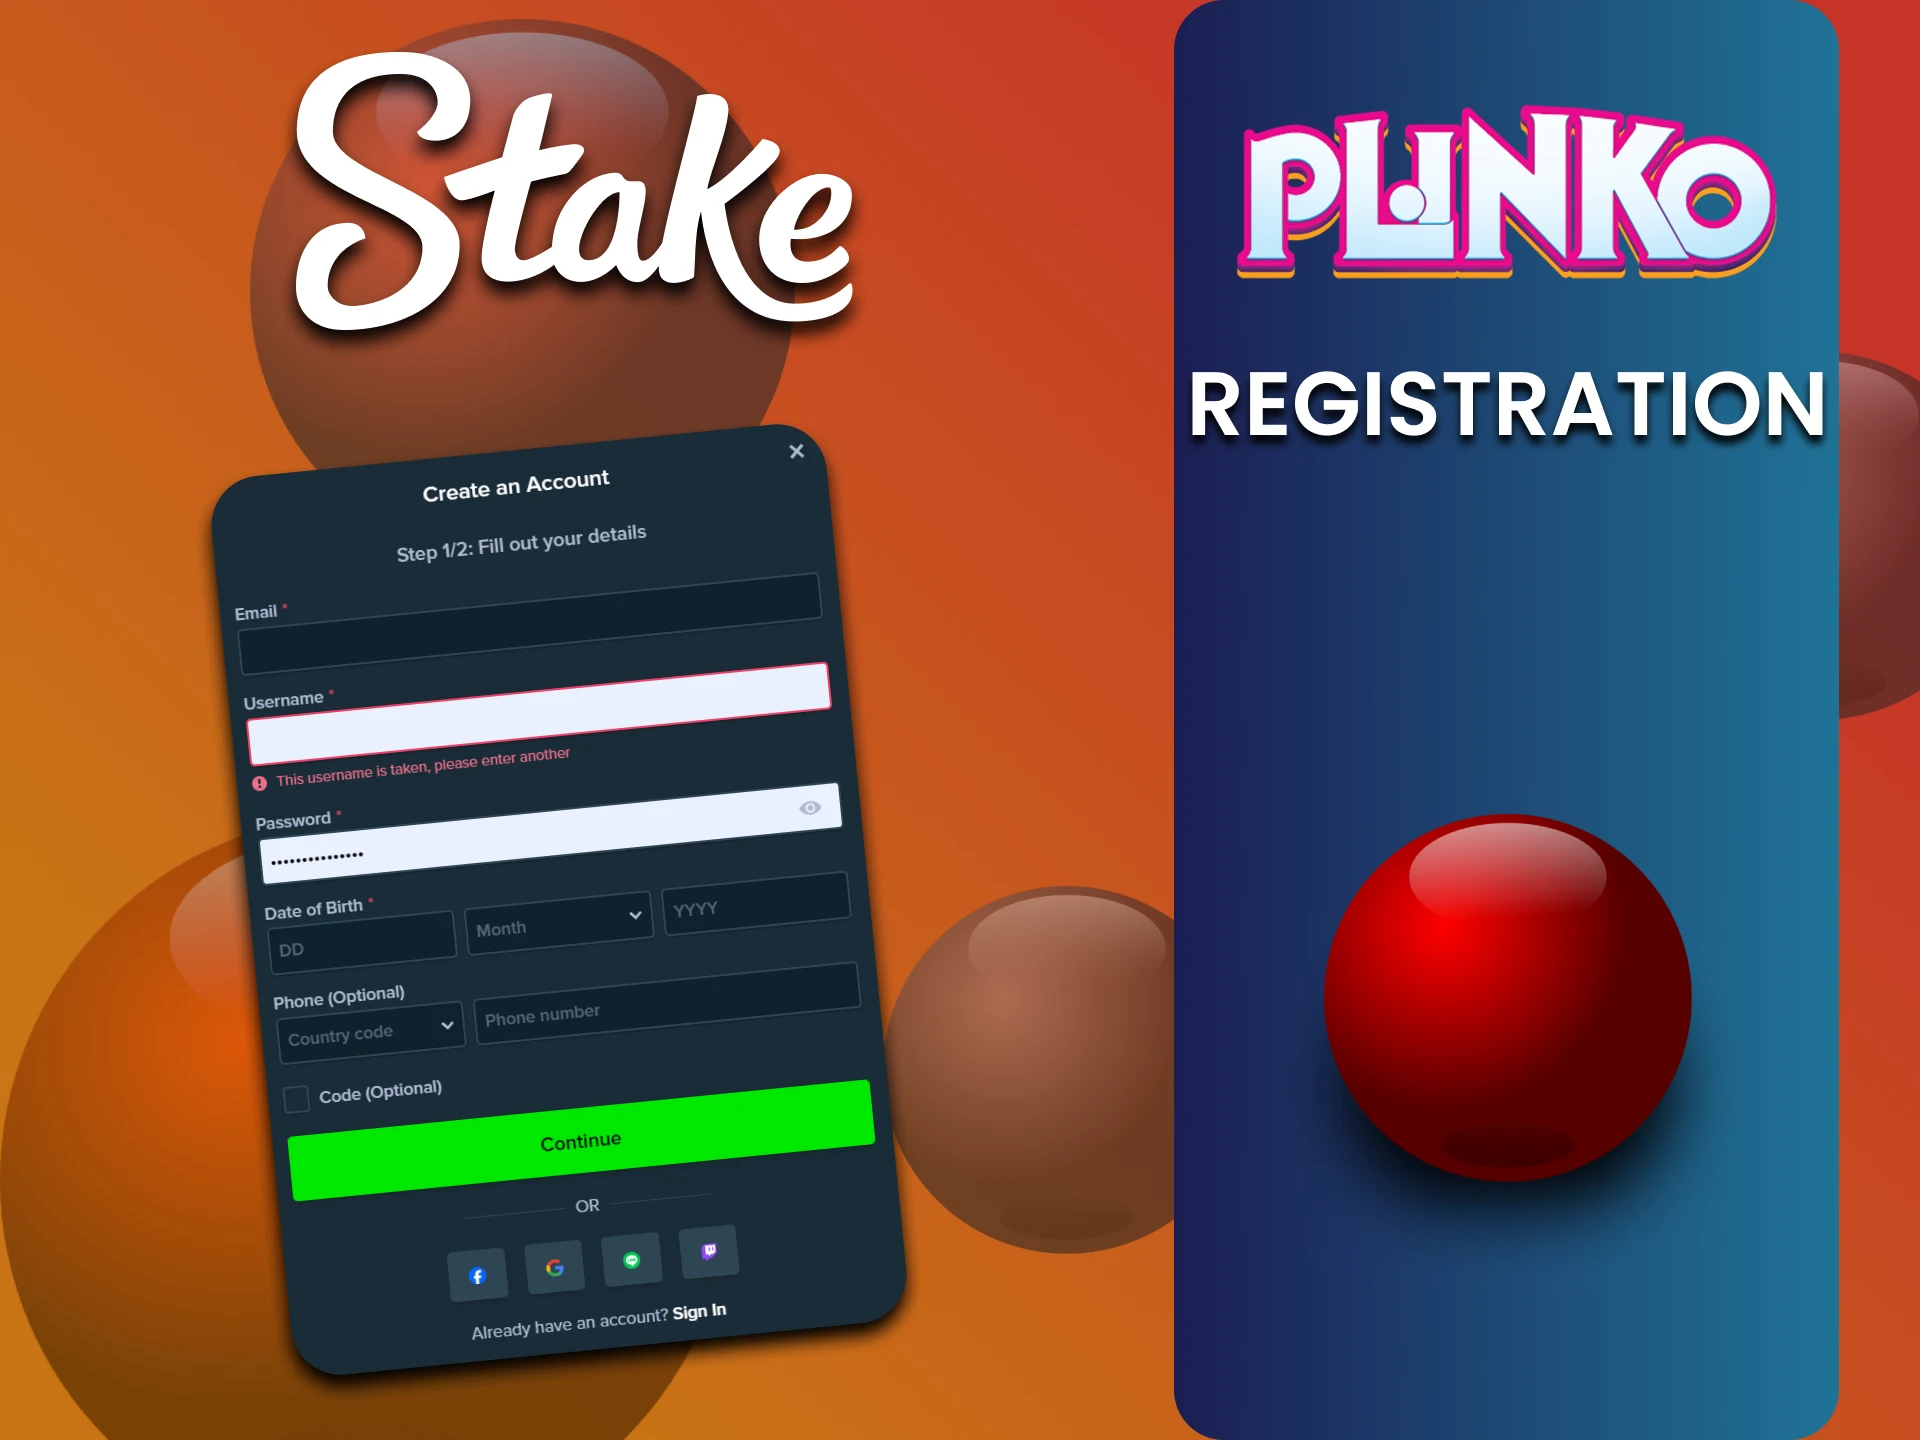 We'll tell you everything about registering for Stake to play Plinko.